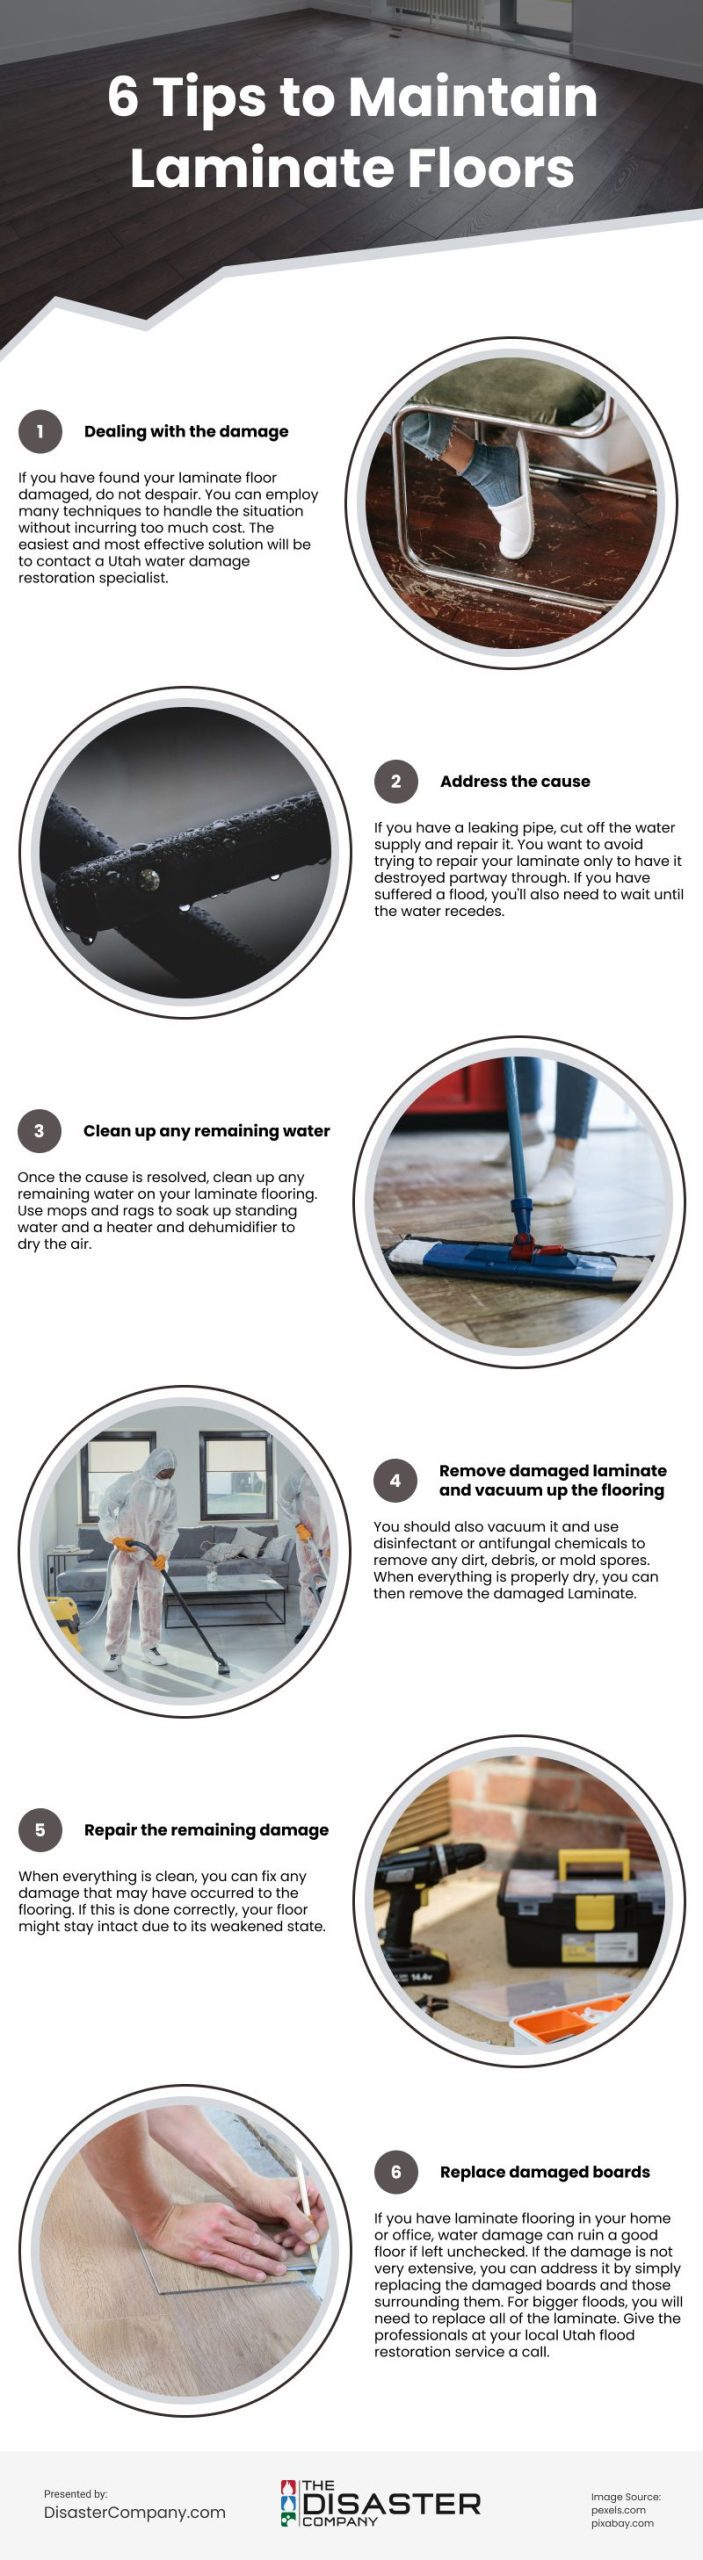 6 Tips to Maintain Laminate Floors Infographic